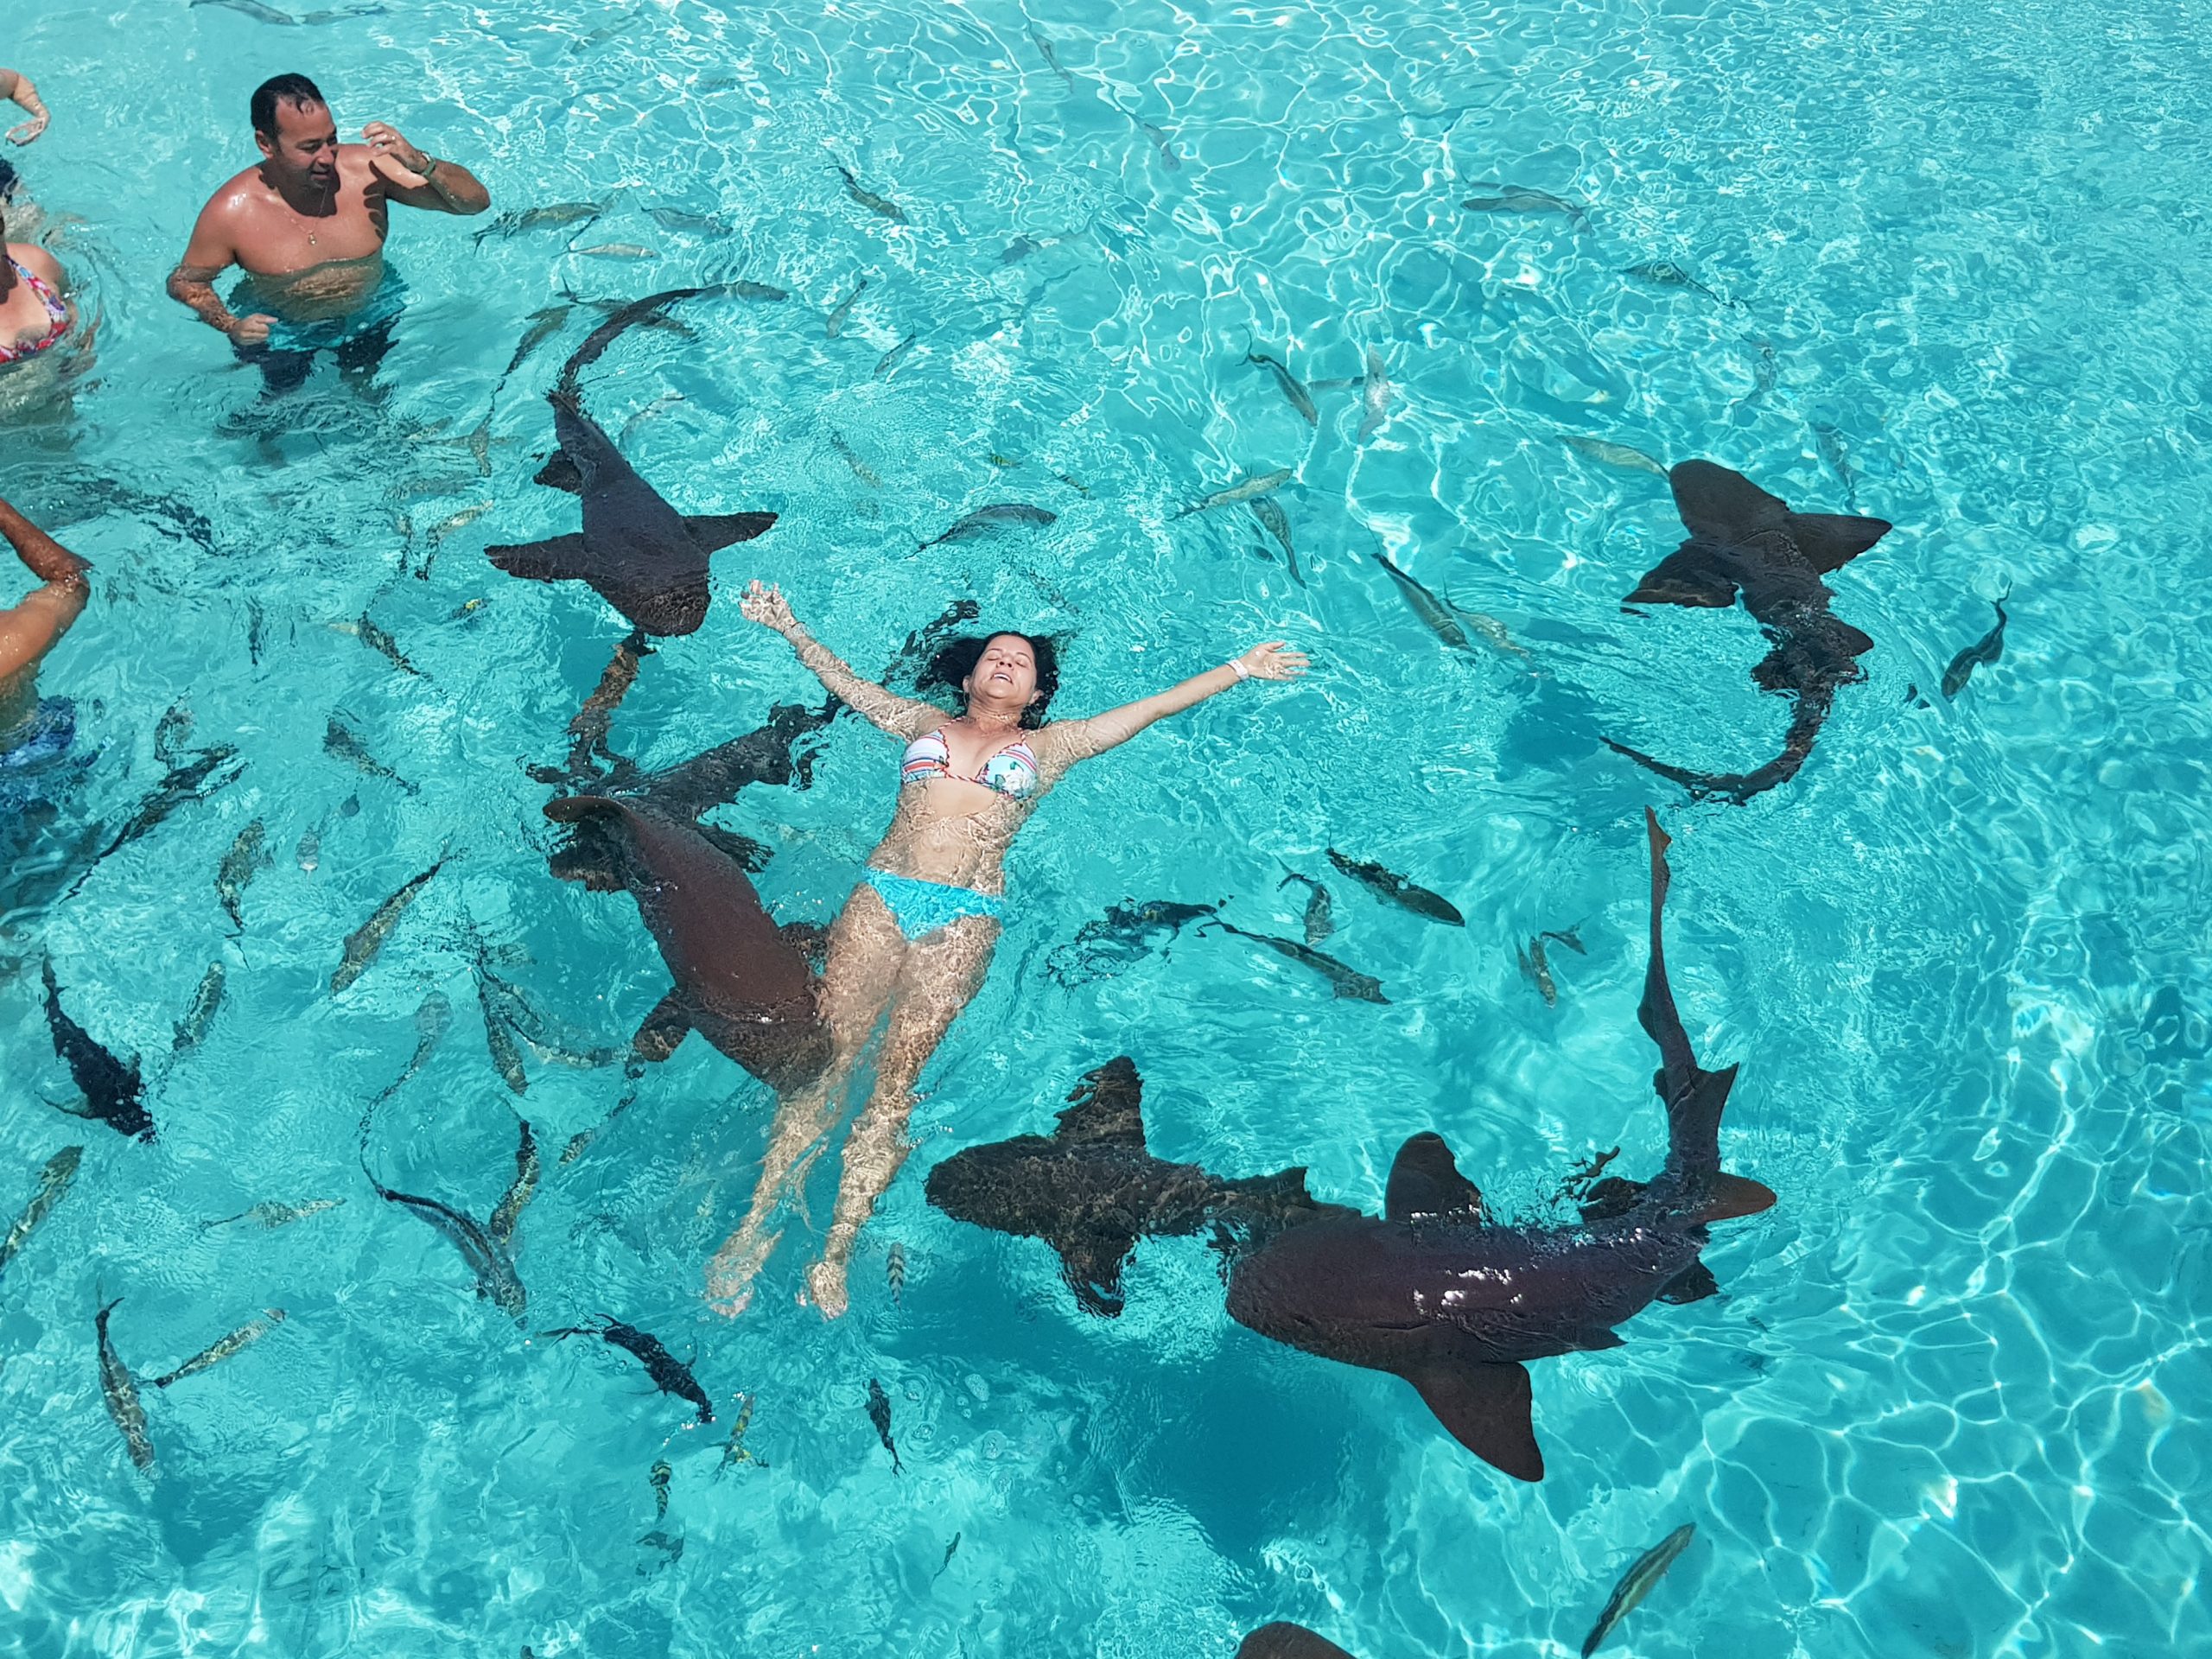 Swim witht the sharks